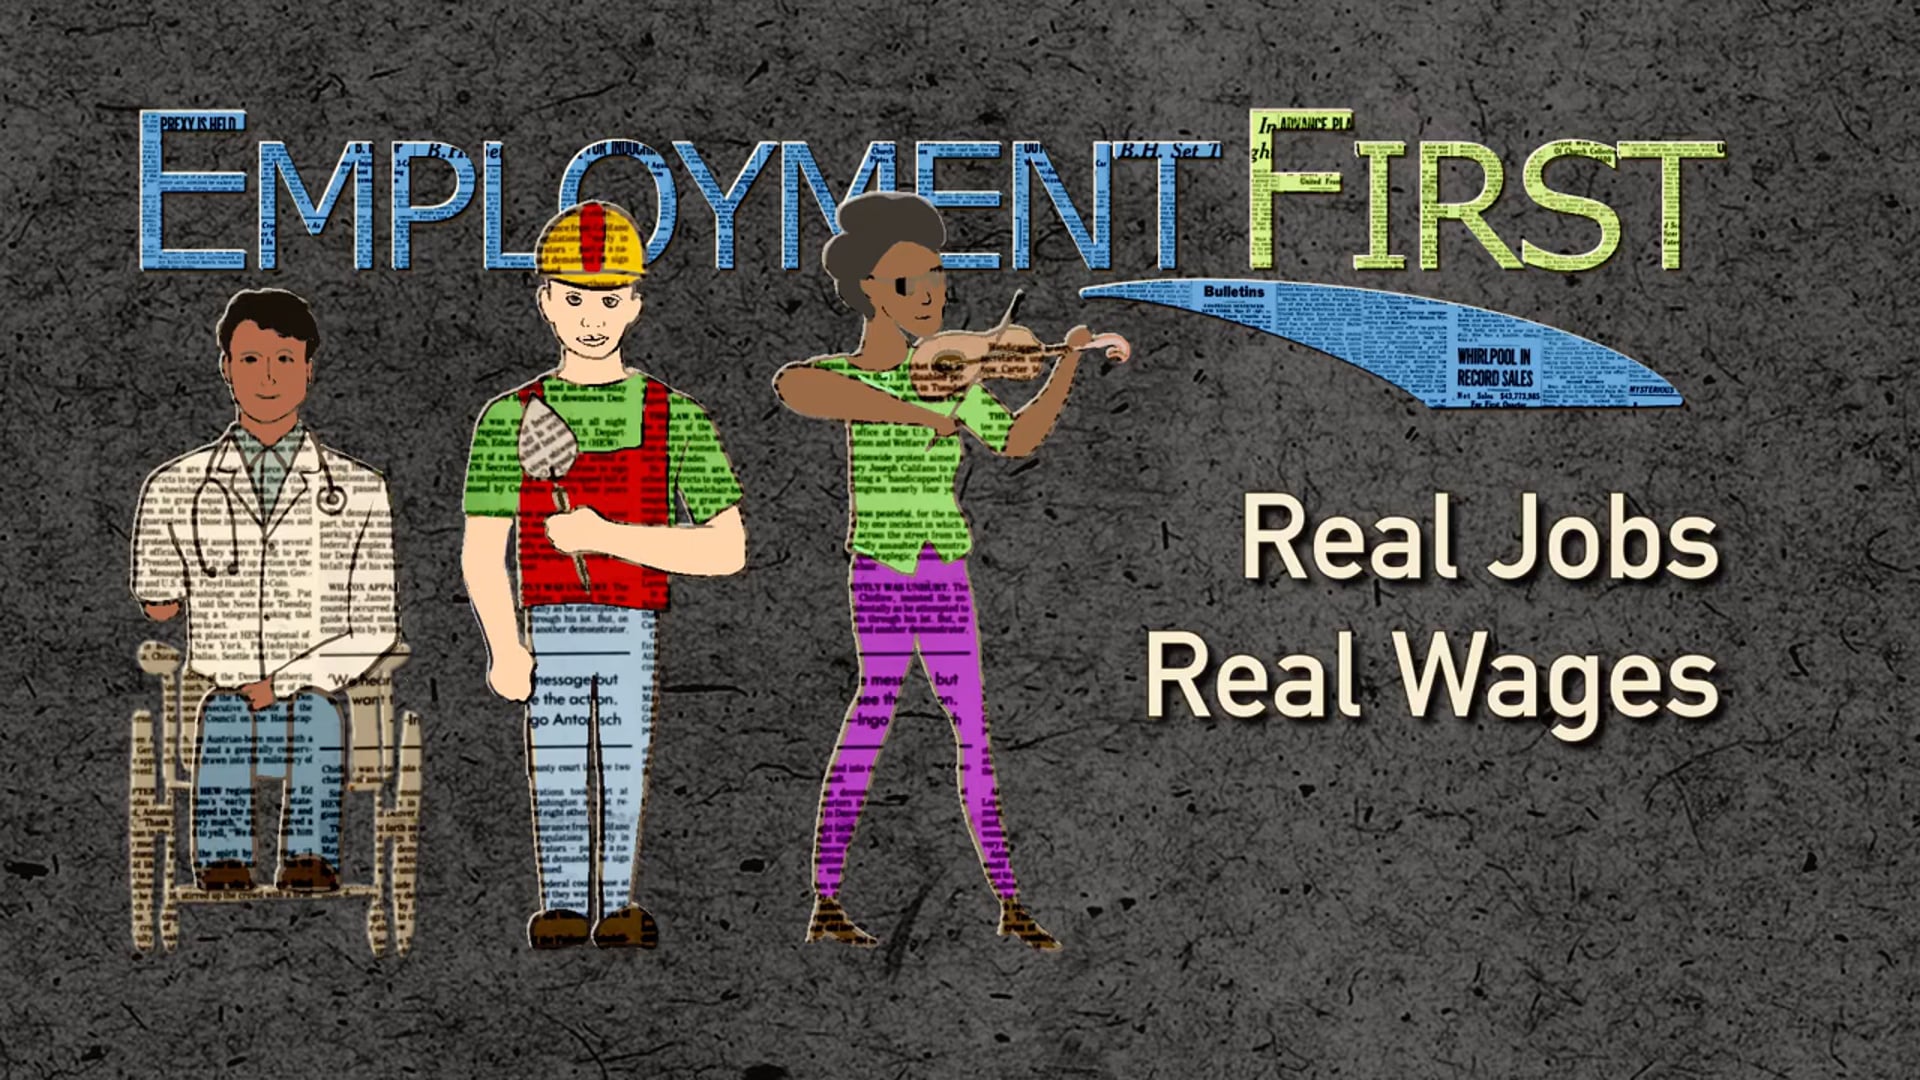 Real Jobs, Real Wages